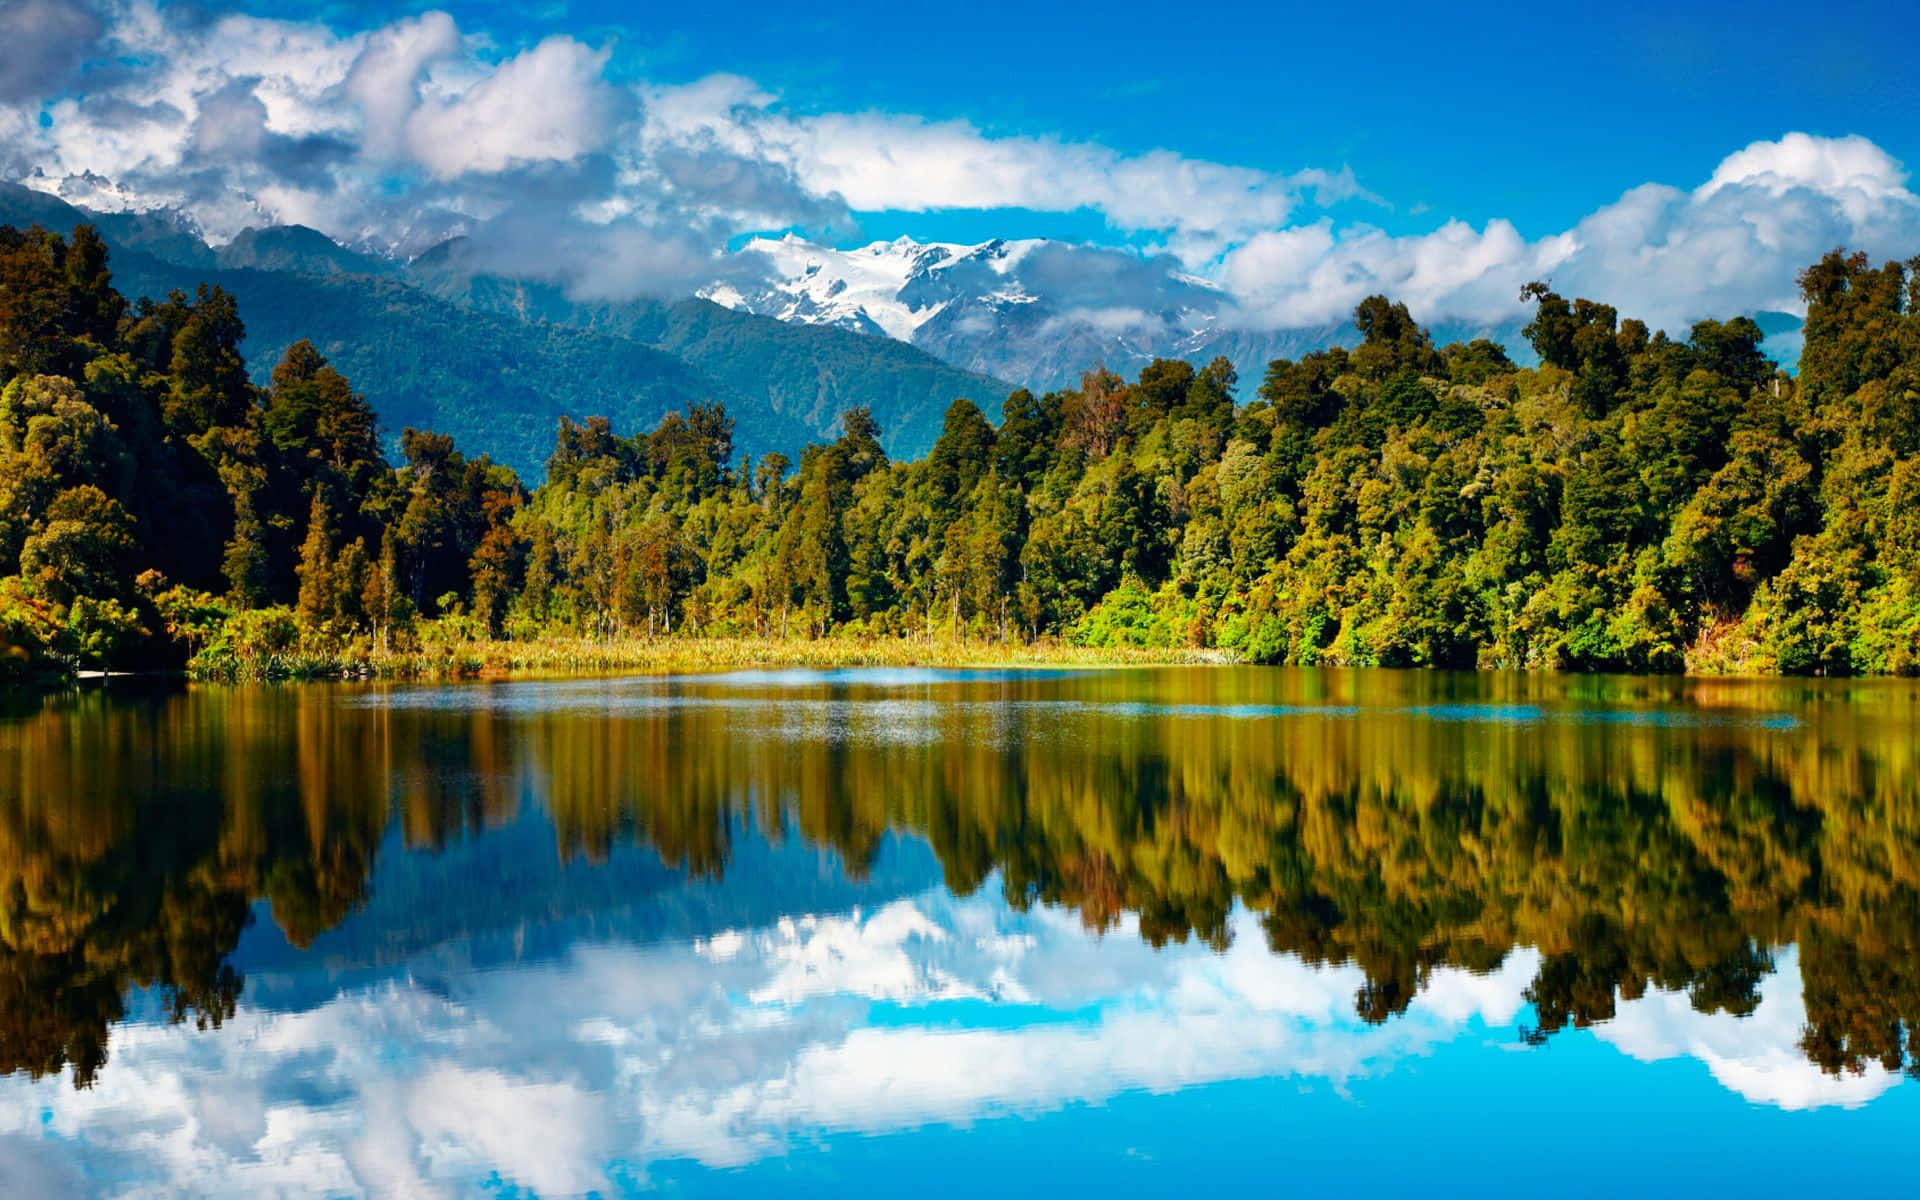 Explore the Land of New Zealand